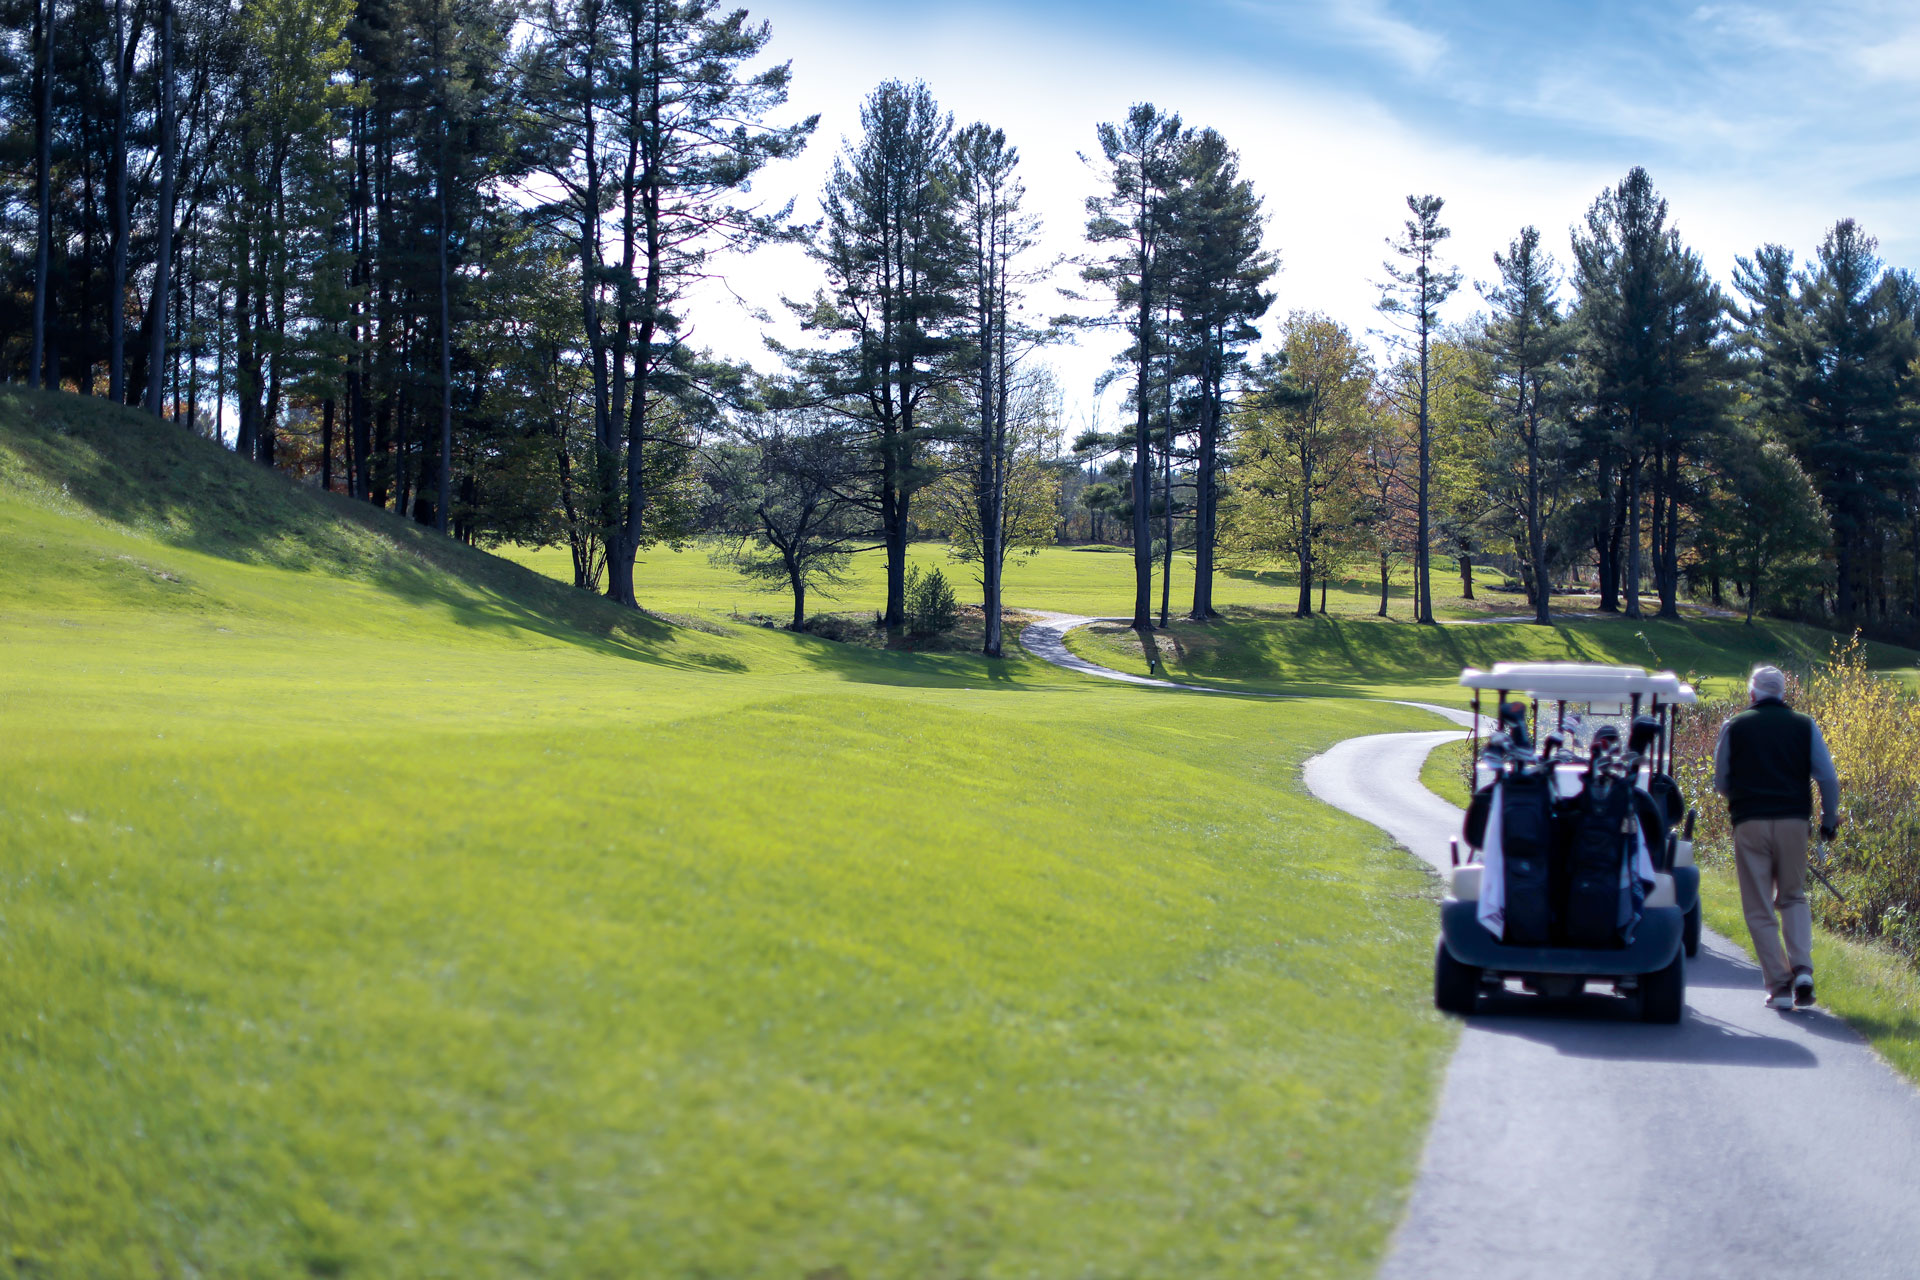 golf cart with a person walking alongside, surrounded by green